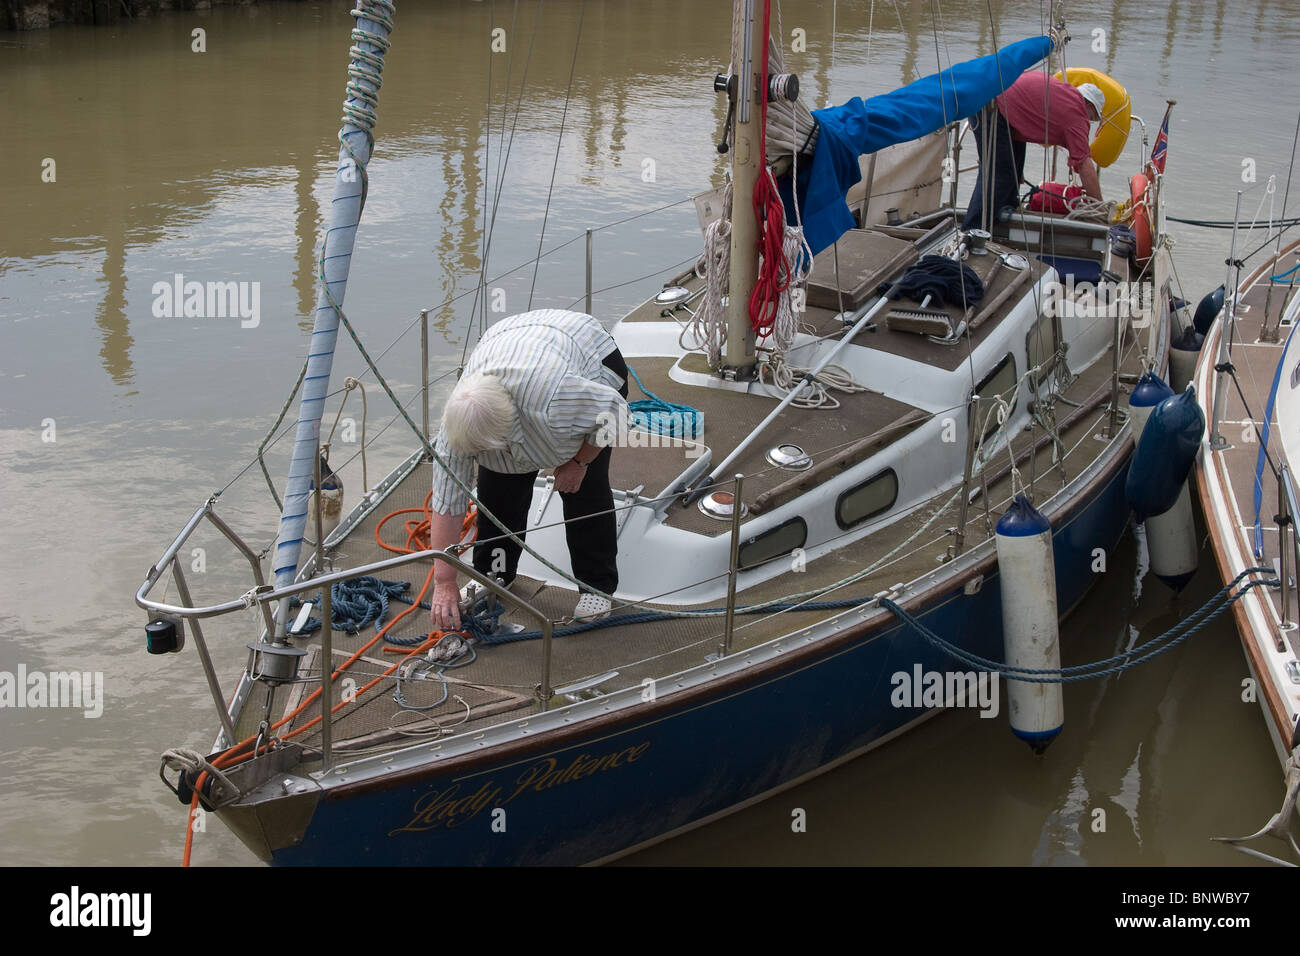 tied double berthed sailing boat sailors talking Stock Photo